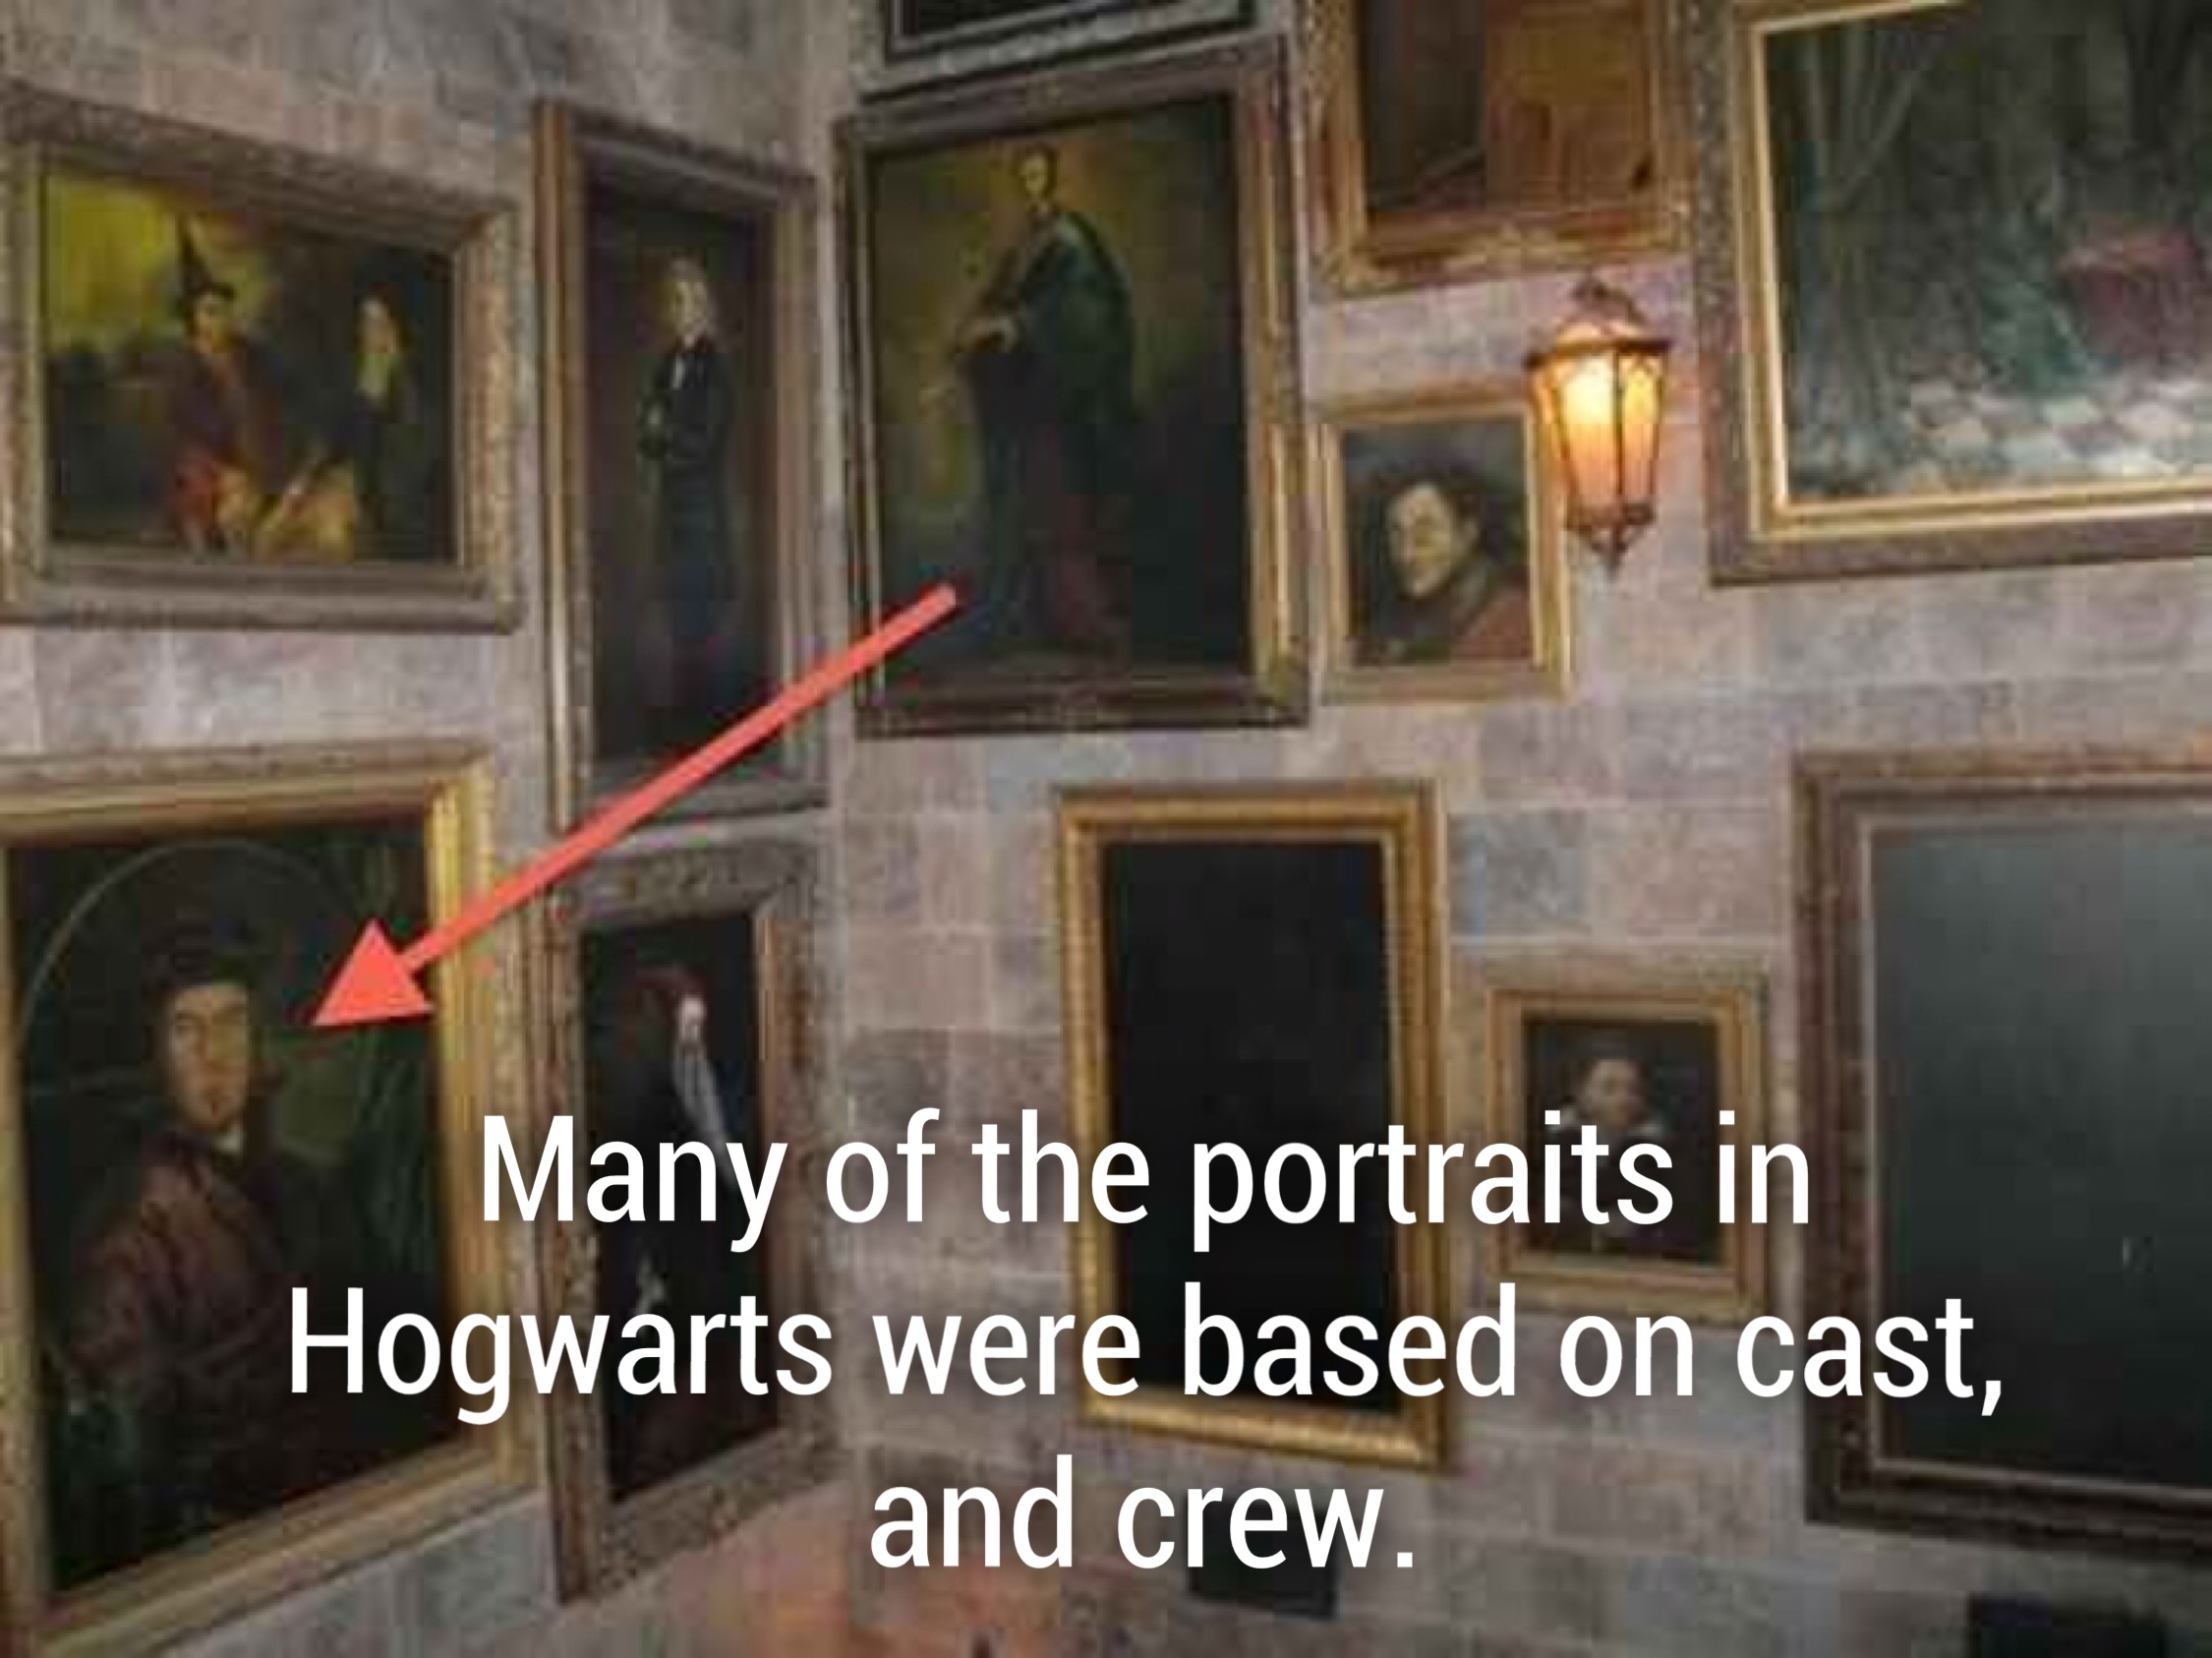 Many of the portraits in Hogwarts were based on cast, and crew.